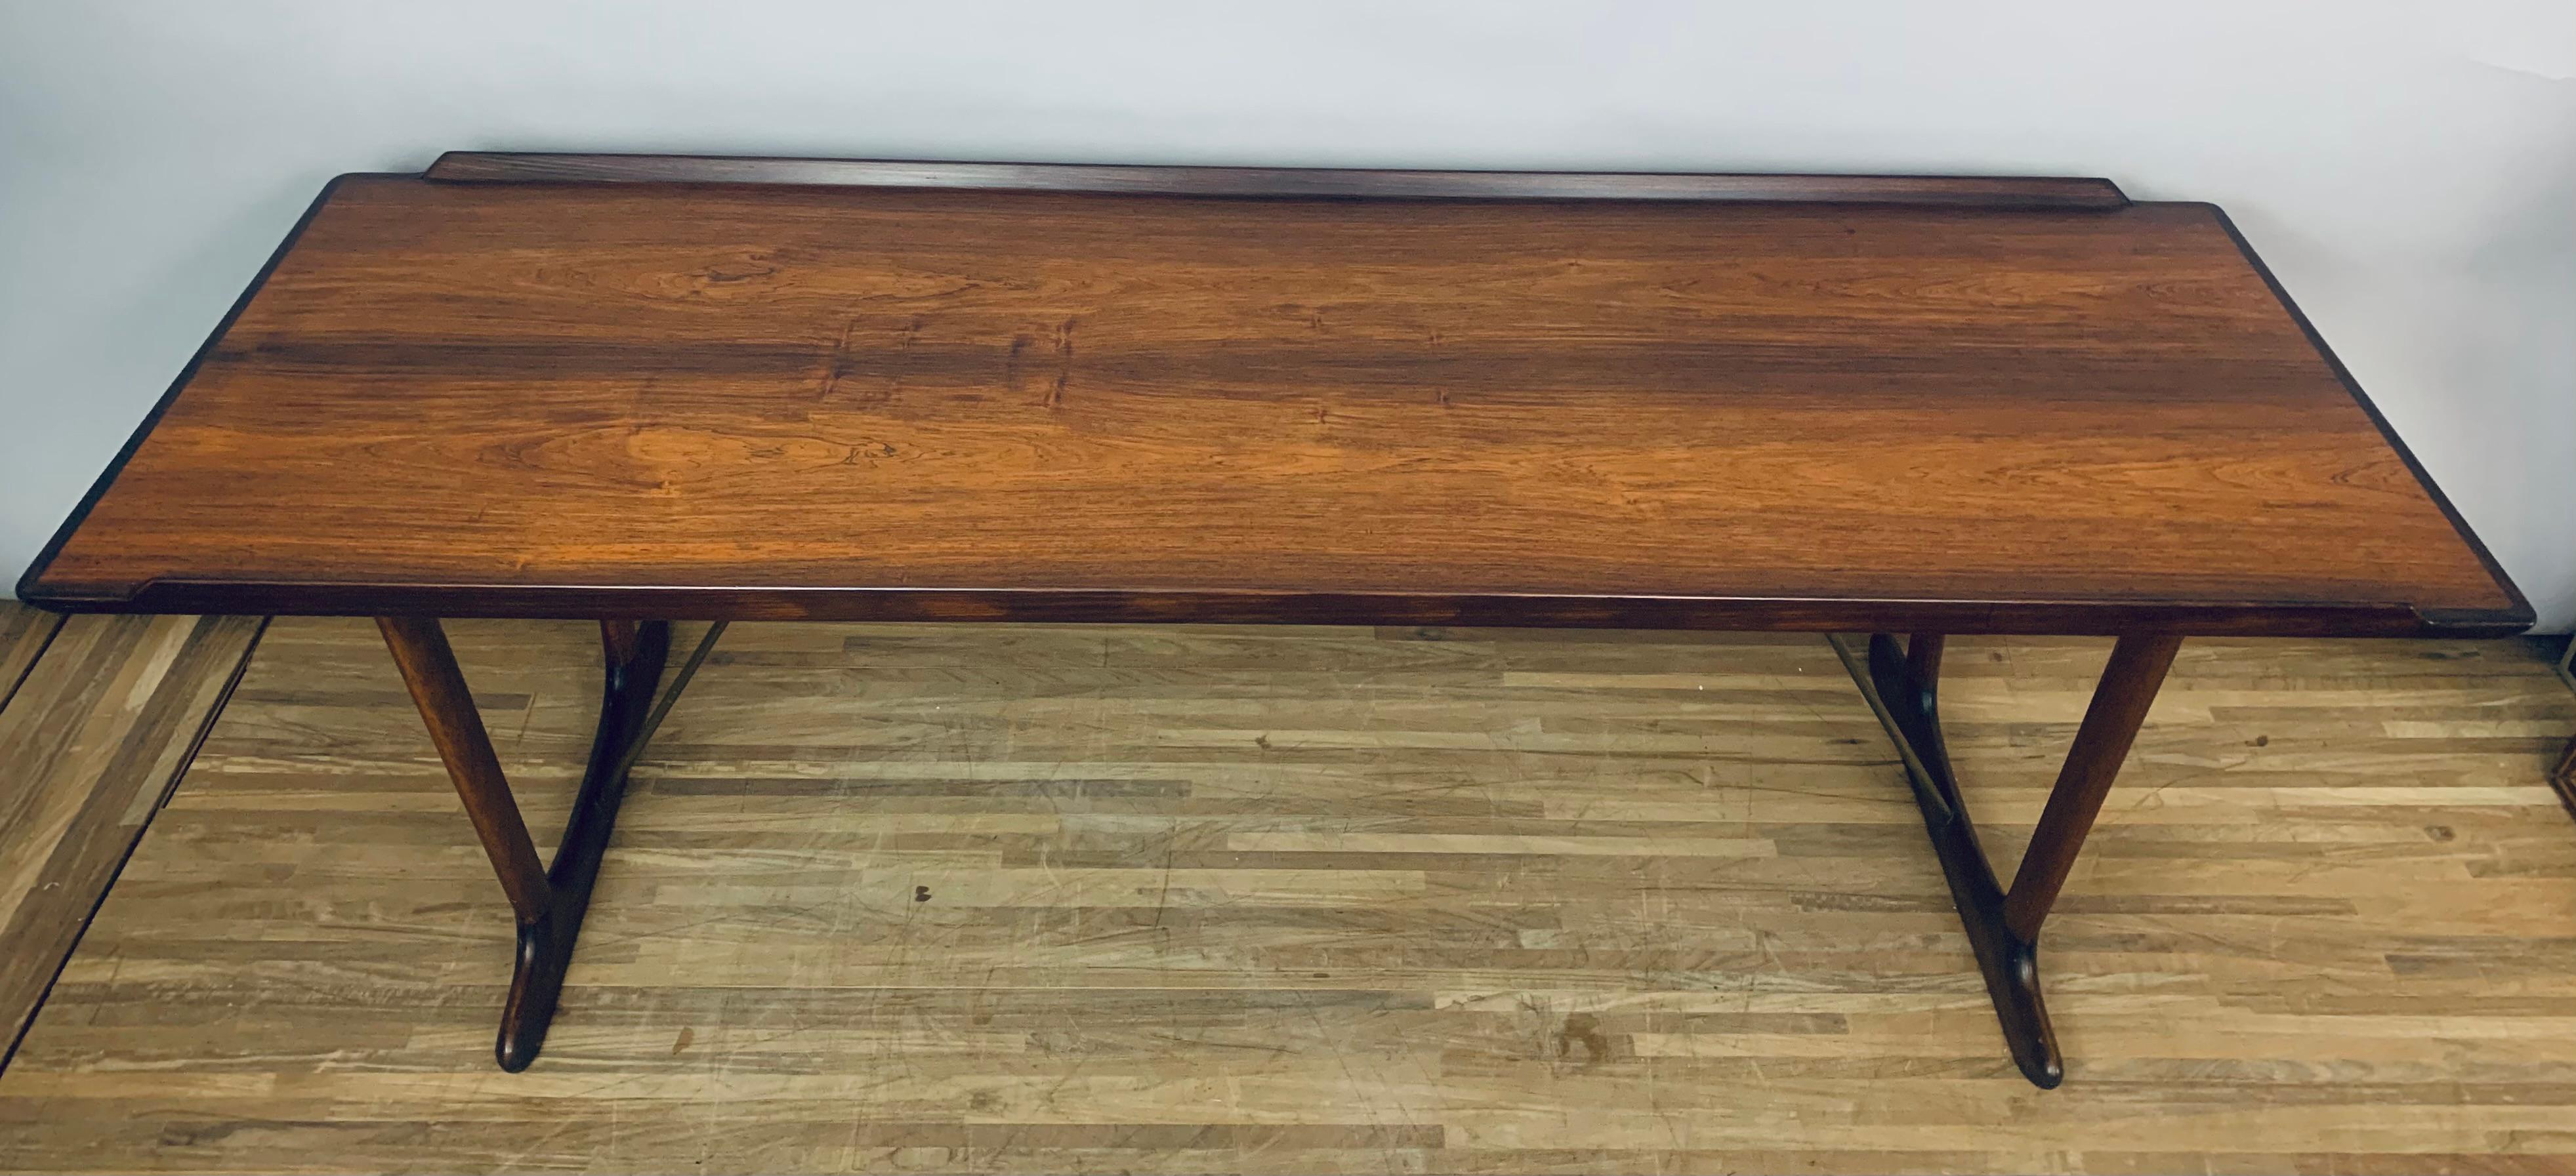 1950s Danish Rosewood coffee table designed by Arne Vodder for Vamo Sonderborg Pv.  The coffee table is stamped with the makers label underneath.  The table maybe a hybrid of two coffee tables because I've been unable to find one similar.  The table